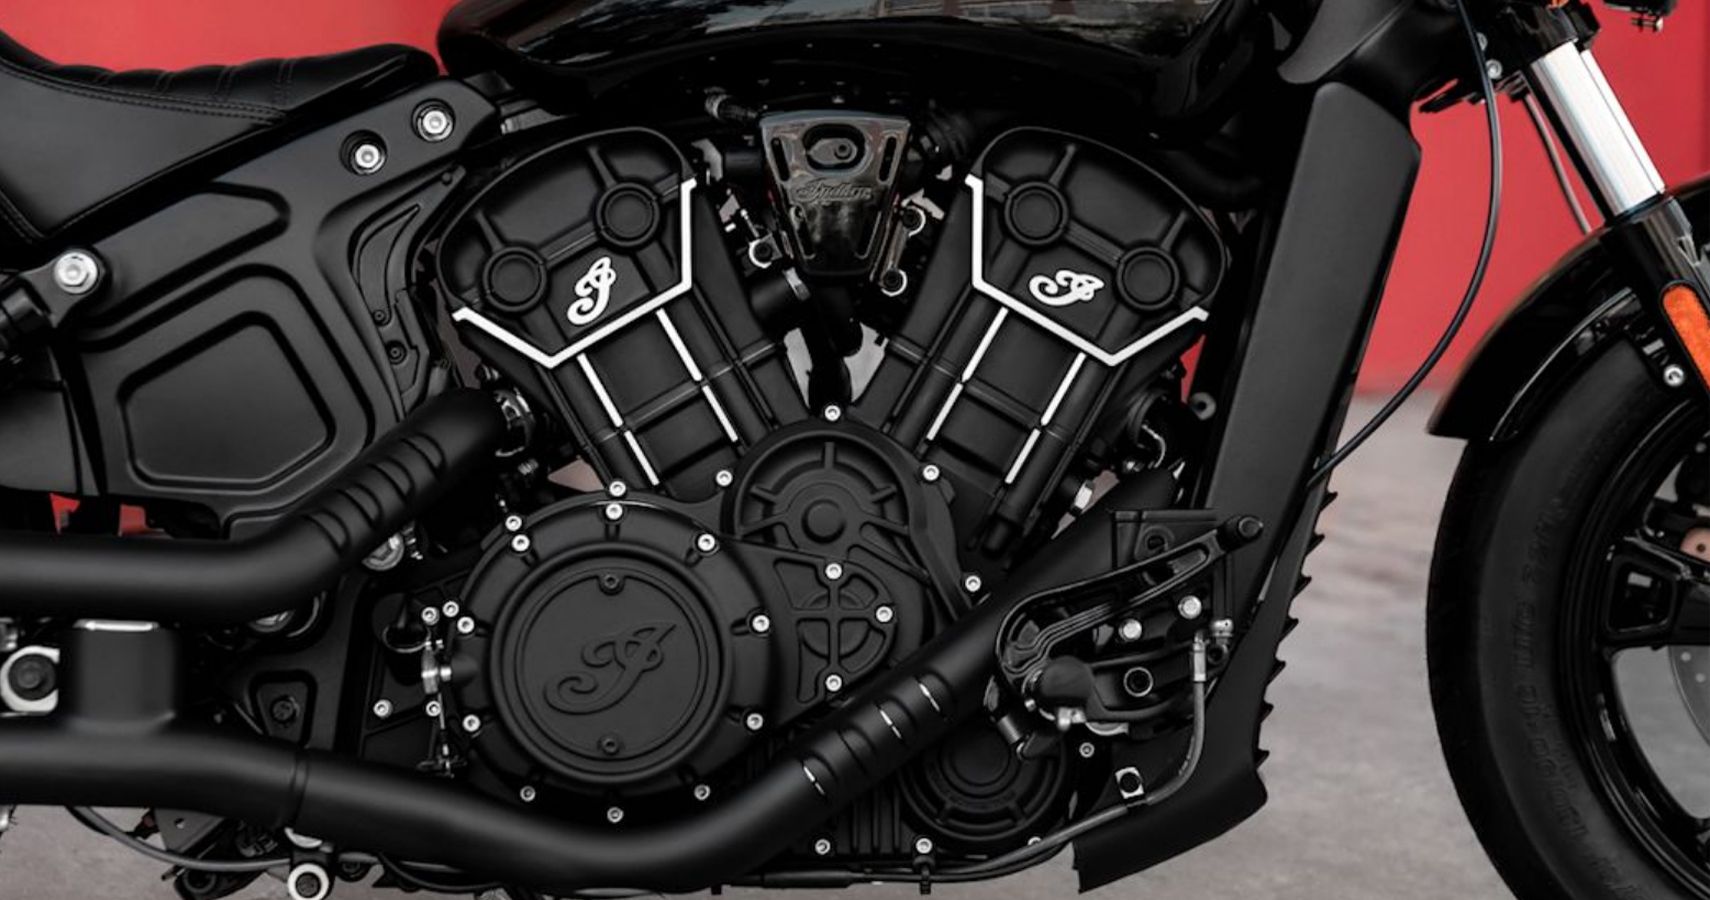 Engine view of Indian Motorcycles 2020 Scout Bobber 60 bike